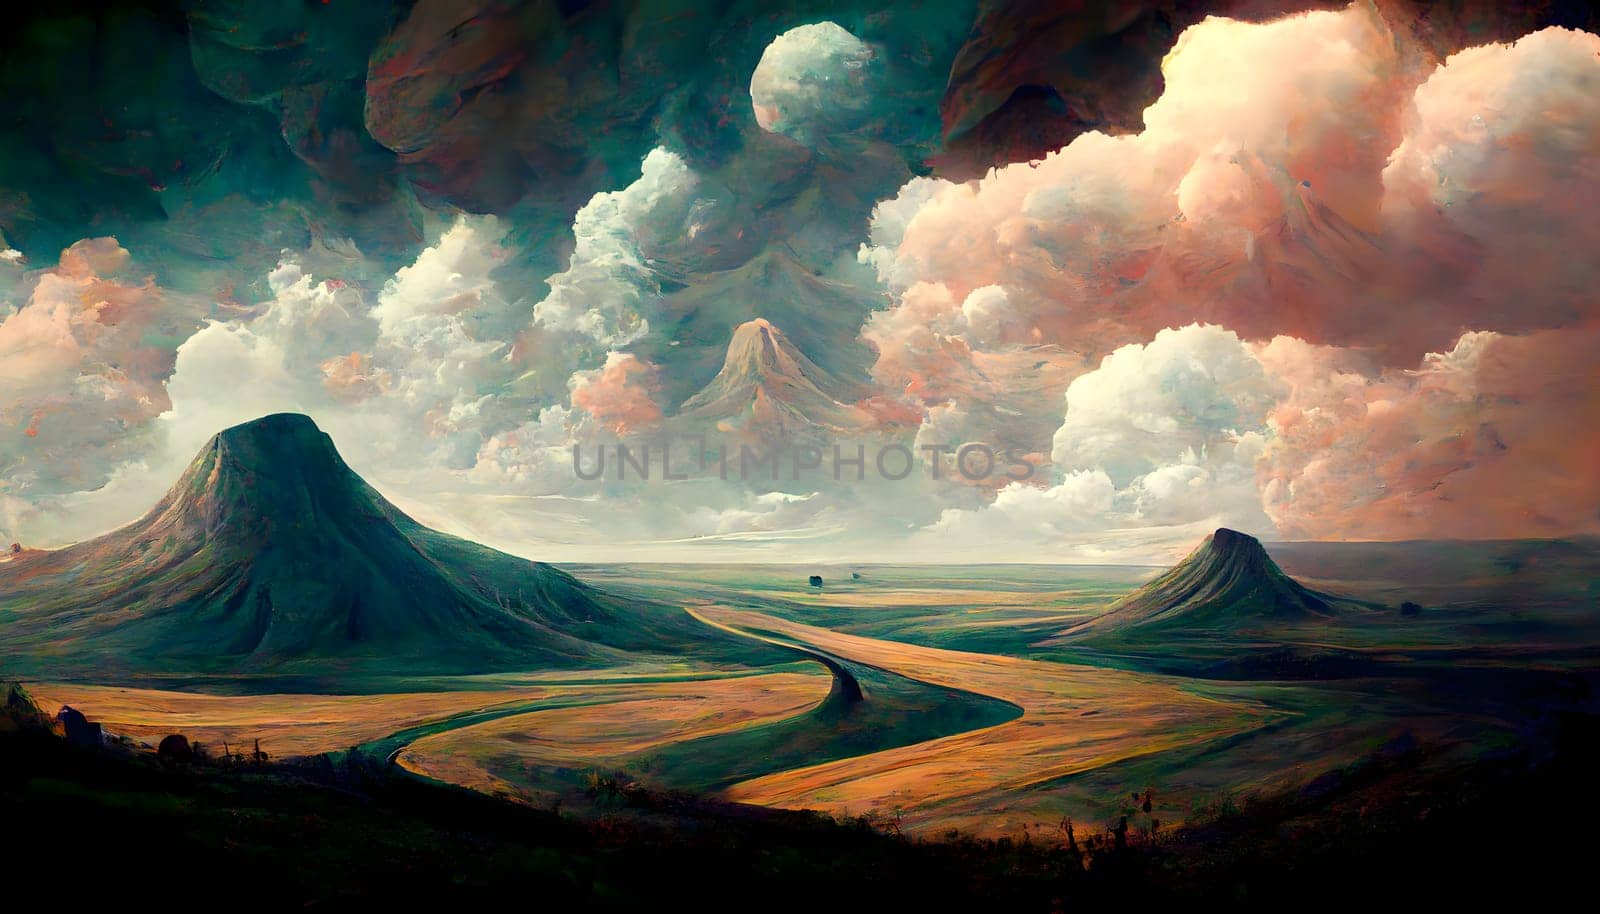 dreamy alien landscape with butte mountains and strange clouds, neural network generated art by z1b